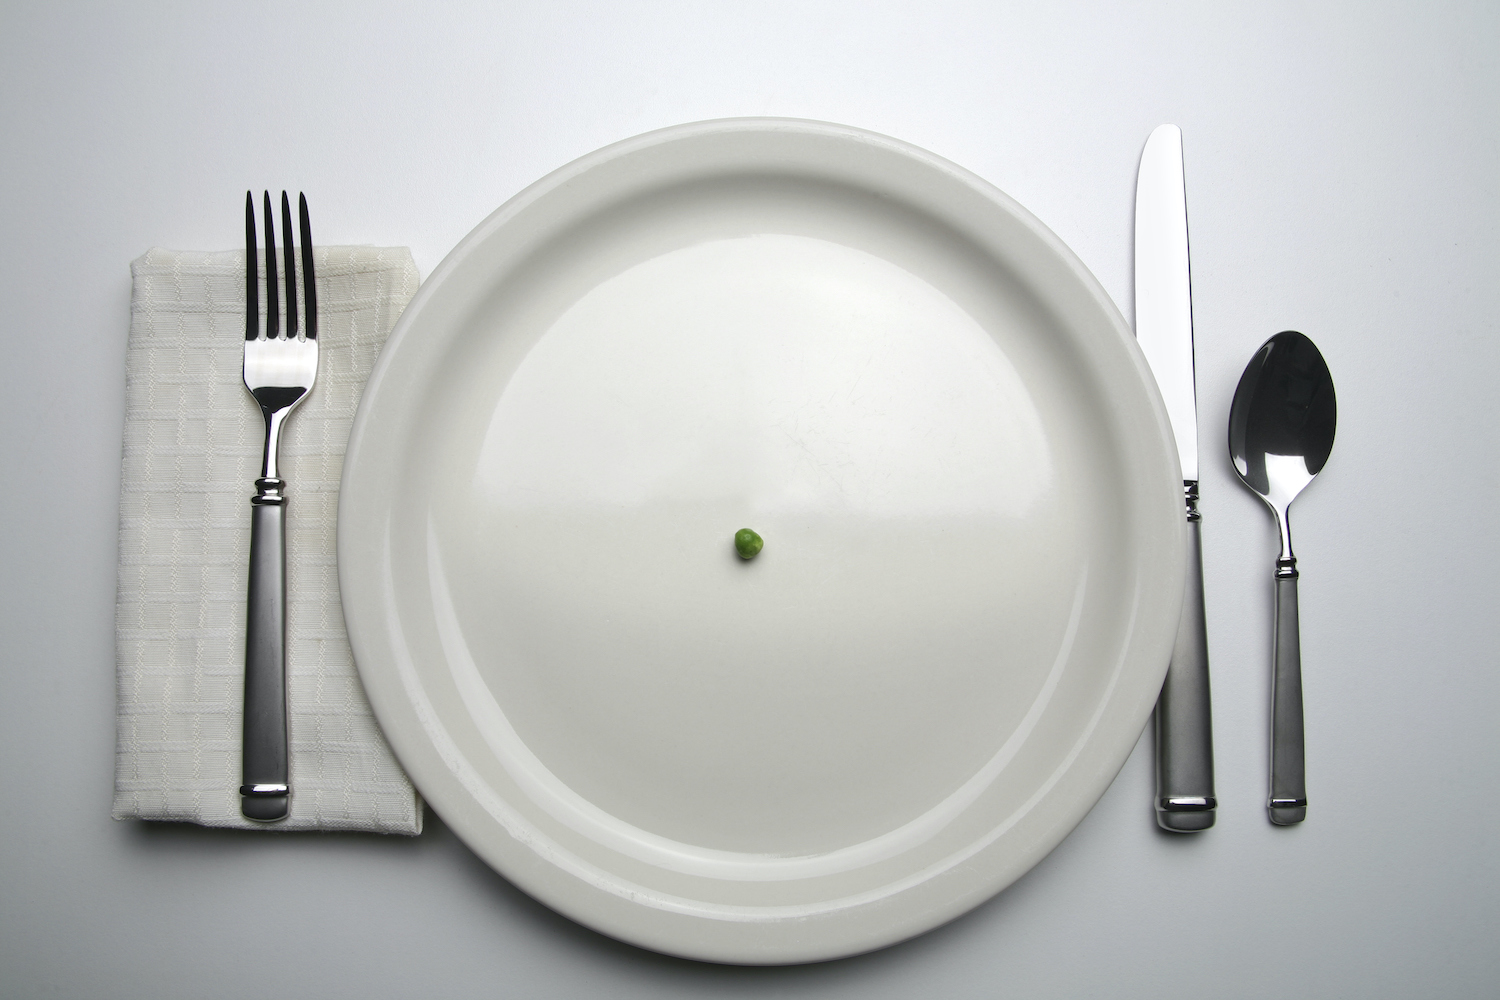 Suggesting scarcity, a single green pea rests in the middle of a dinner plate surrounded by tableware.